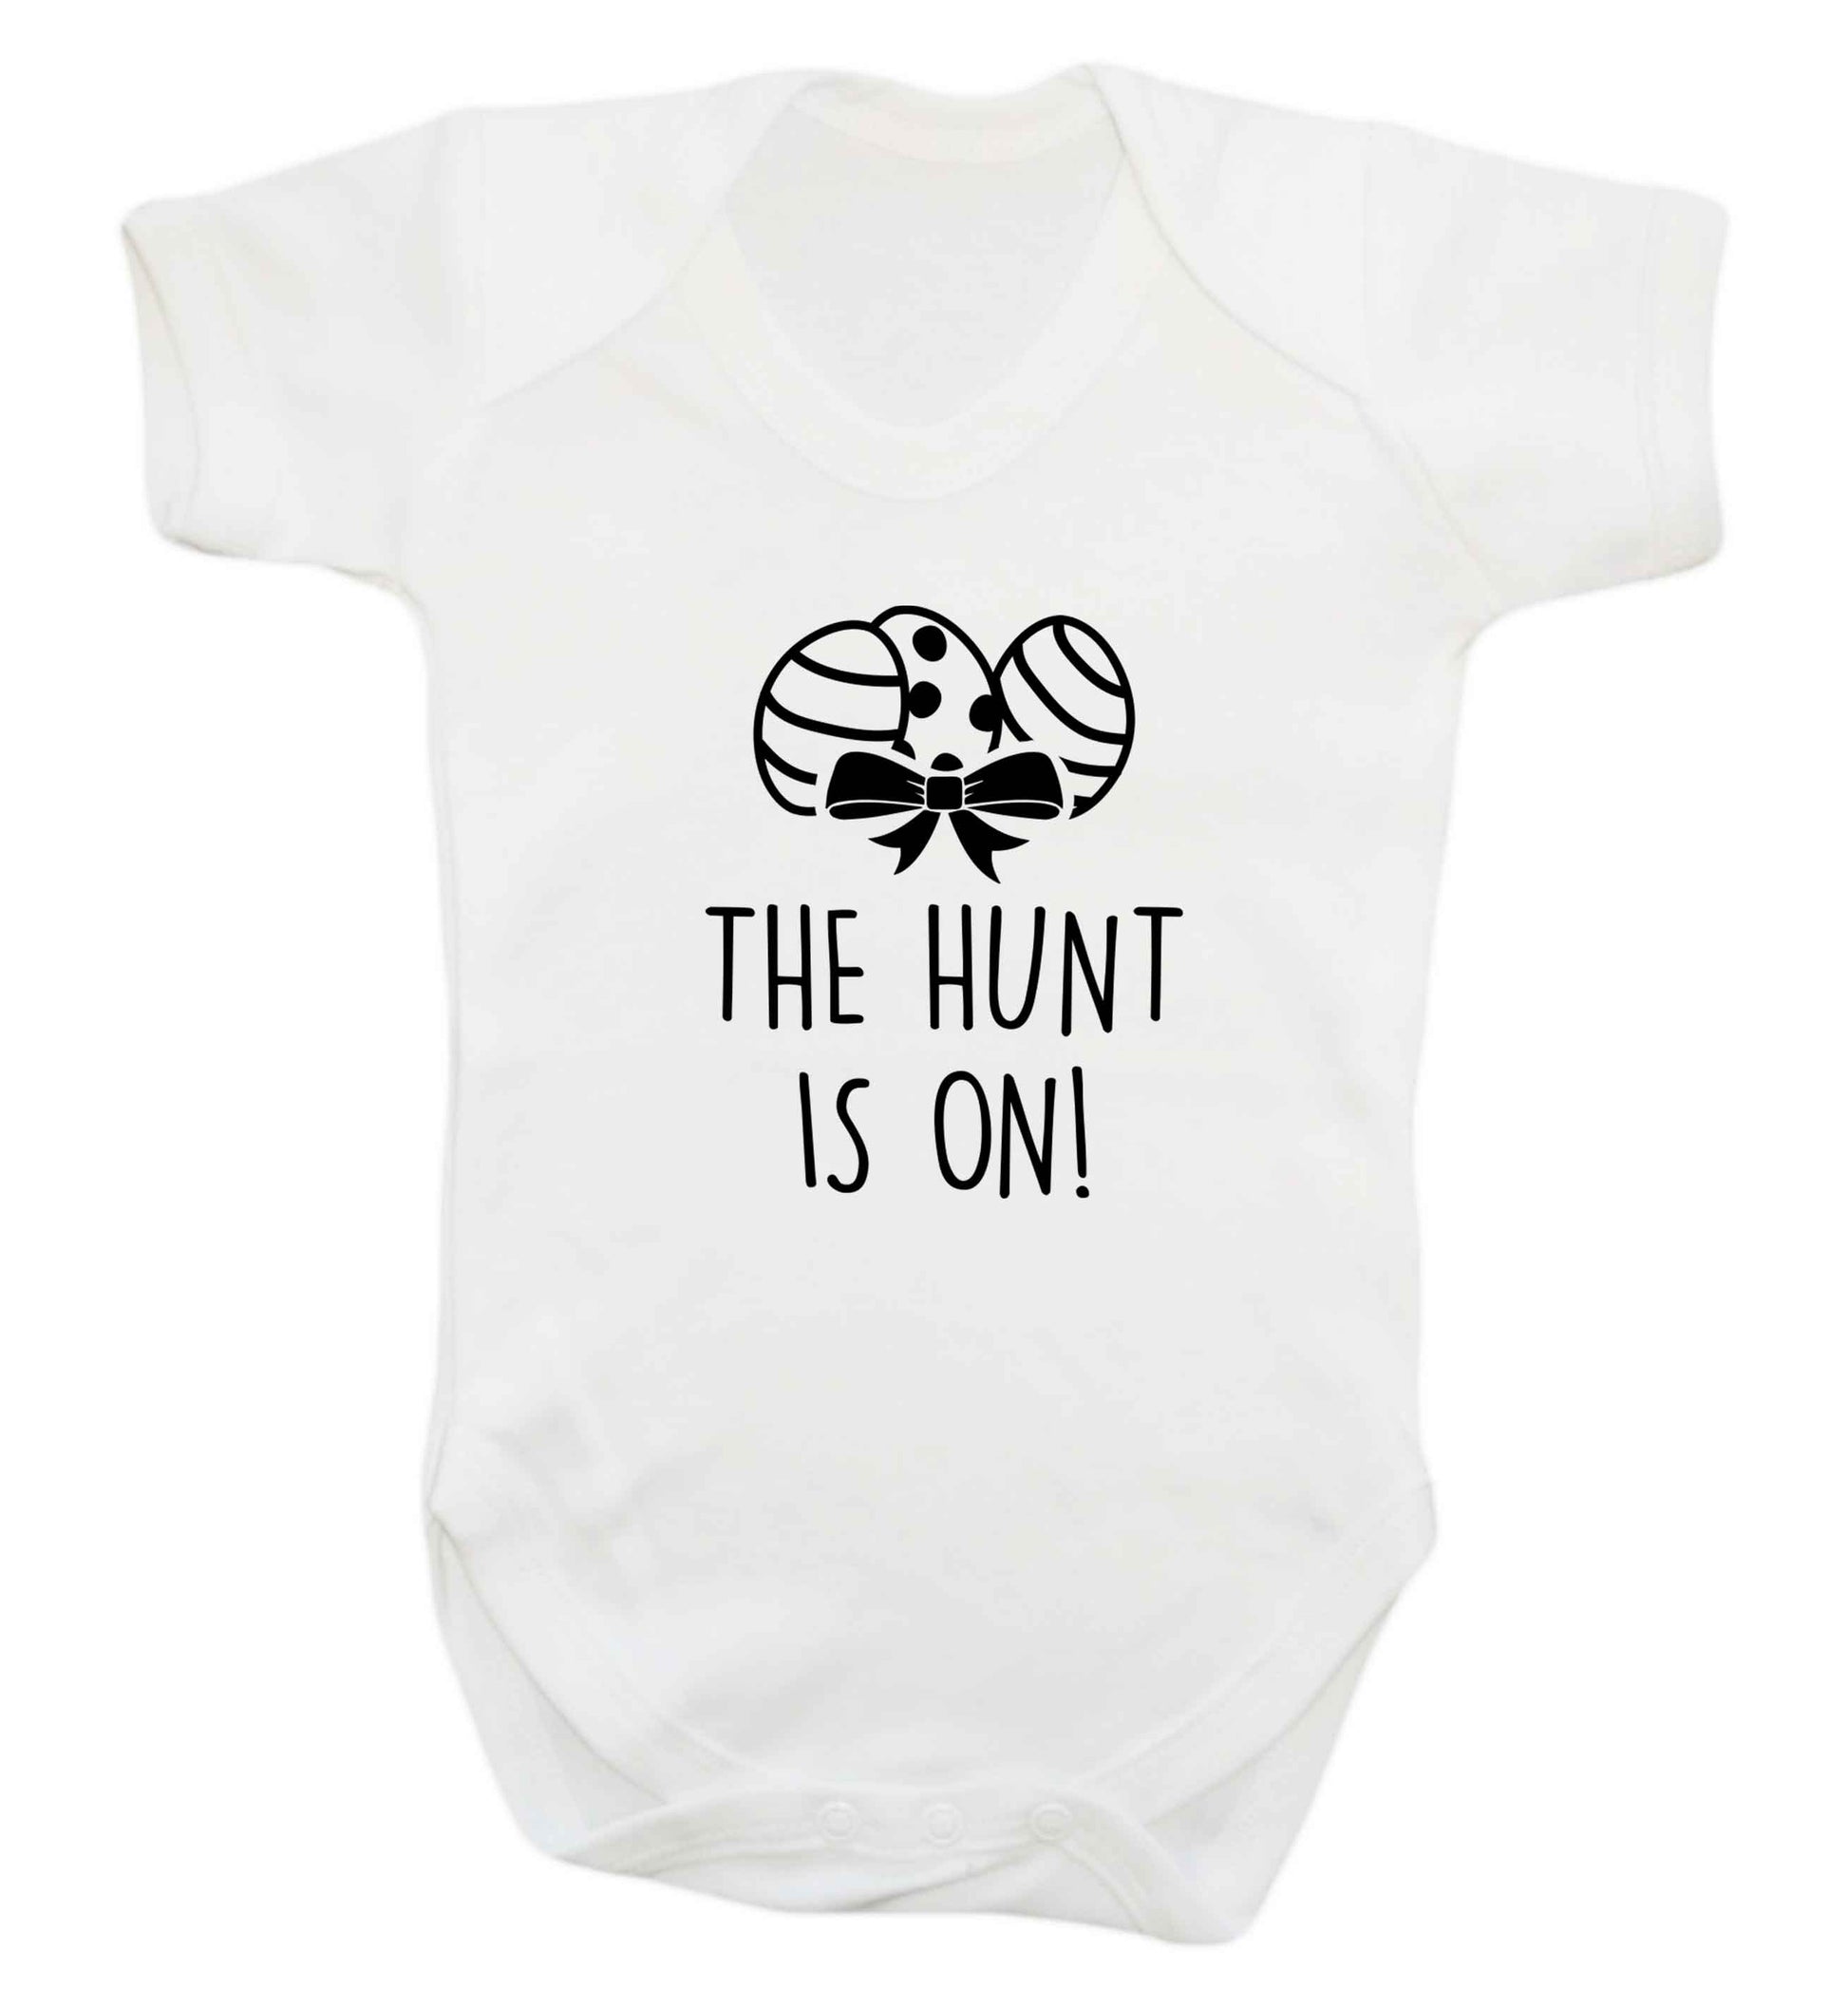 The hunt is on baby vest white 18-24 months